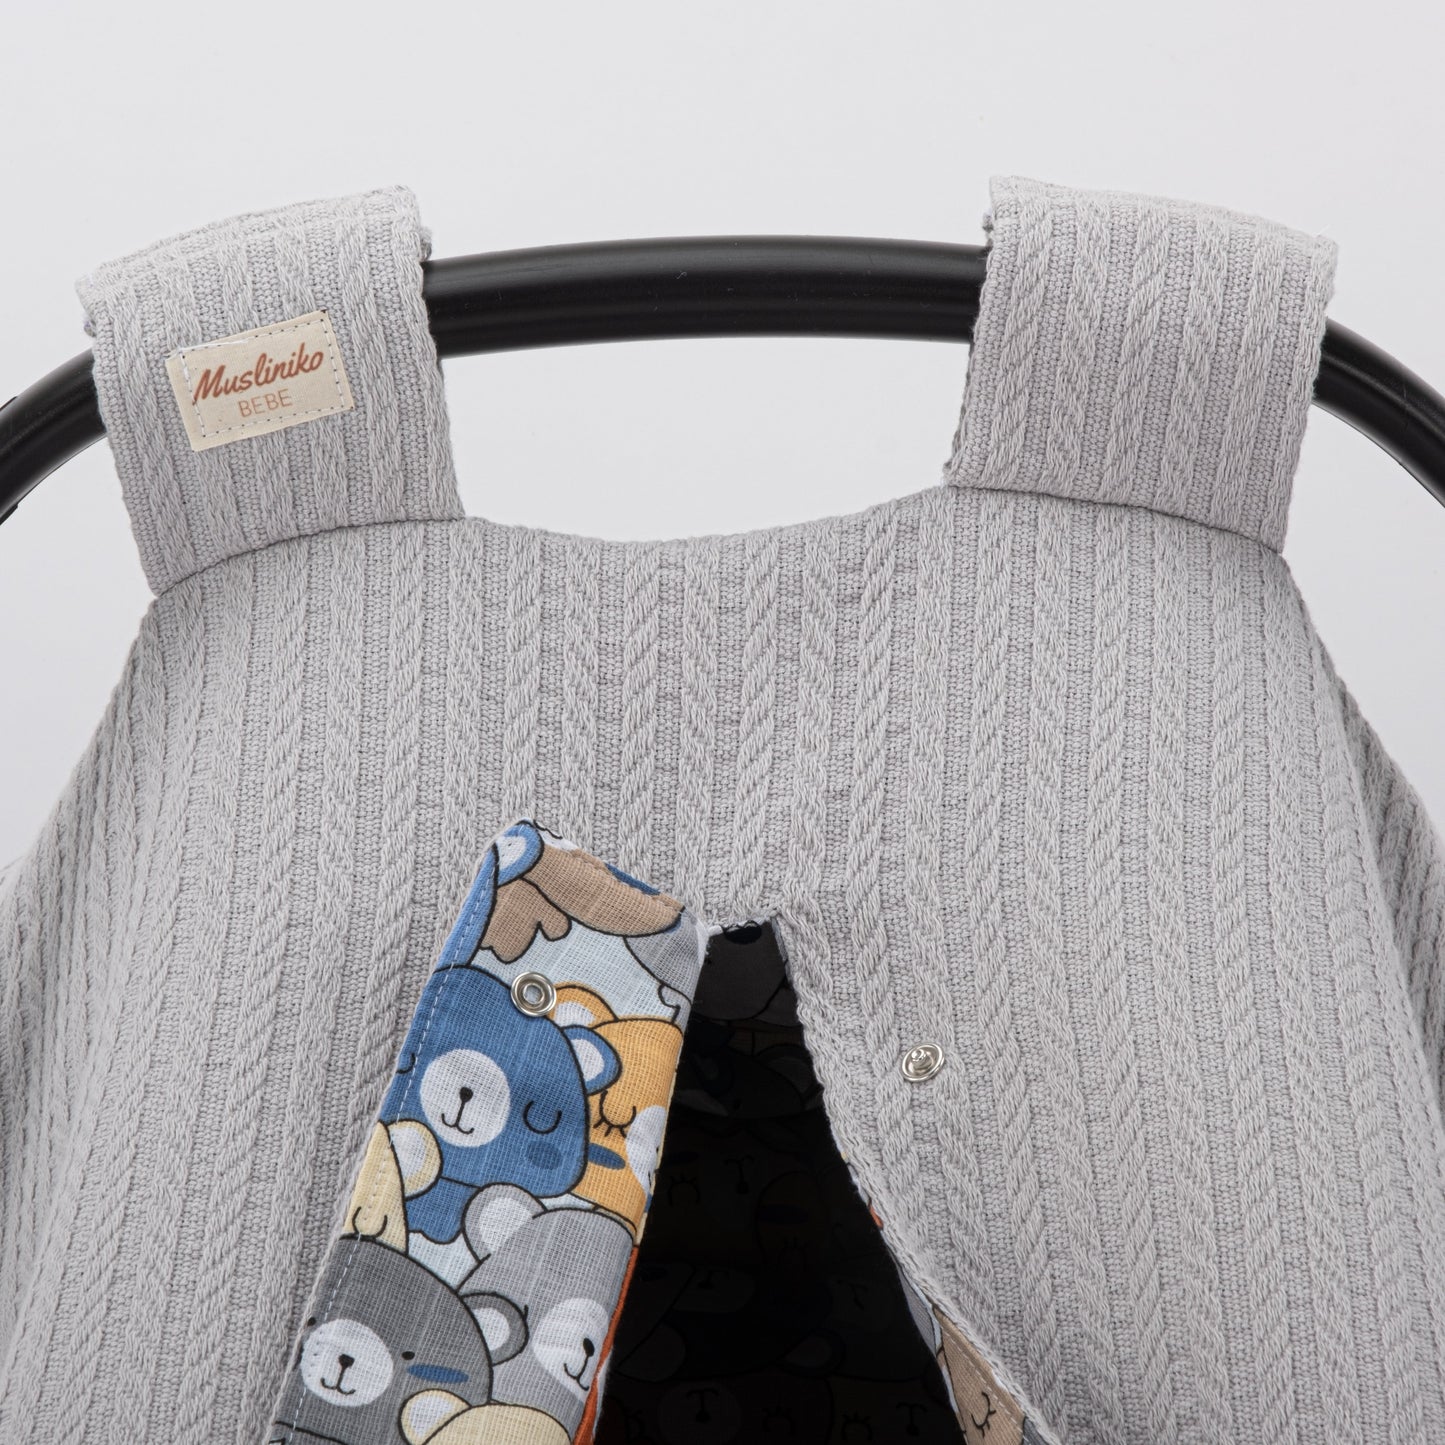 Stroller Cover Set - Double Side - Gray Knitted - Colorful Teddy Bears